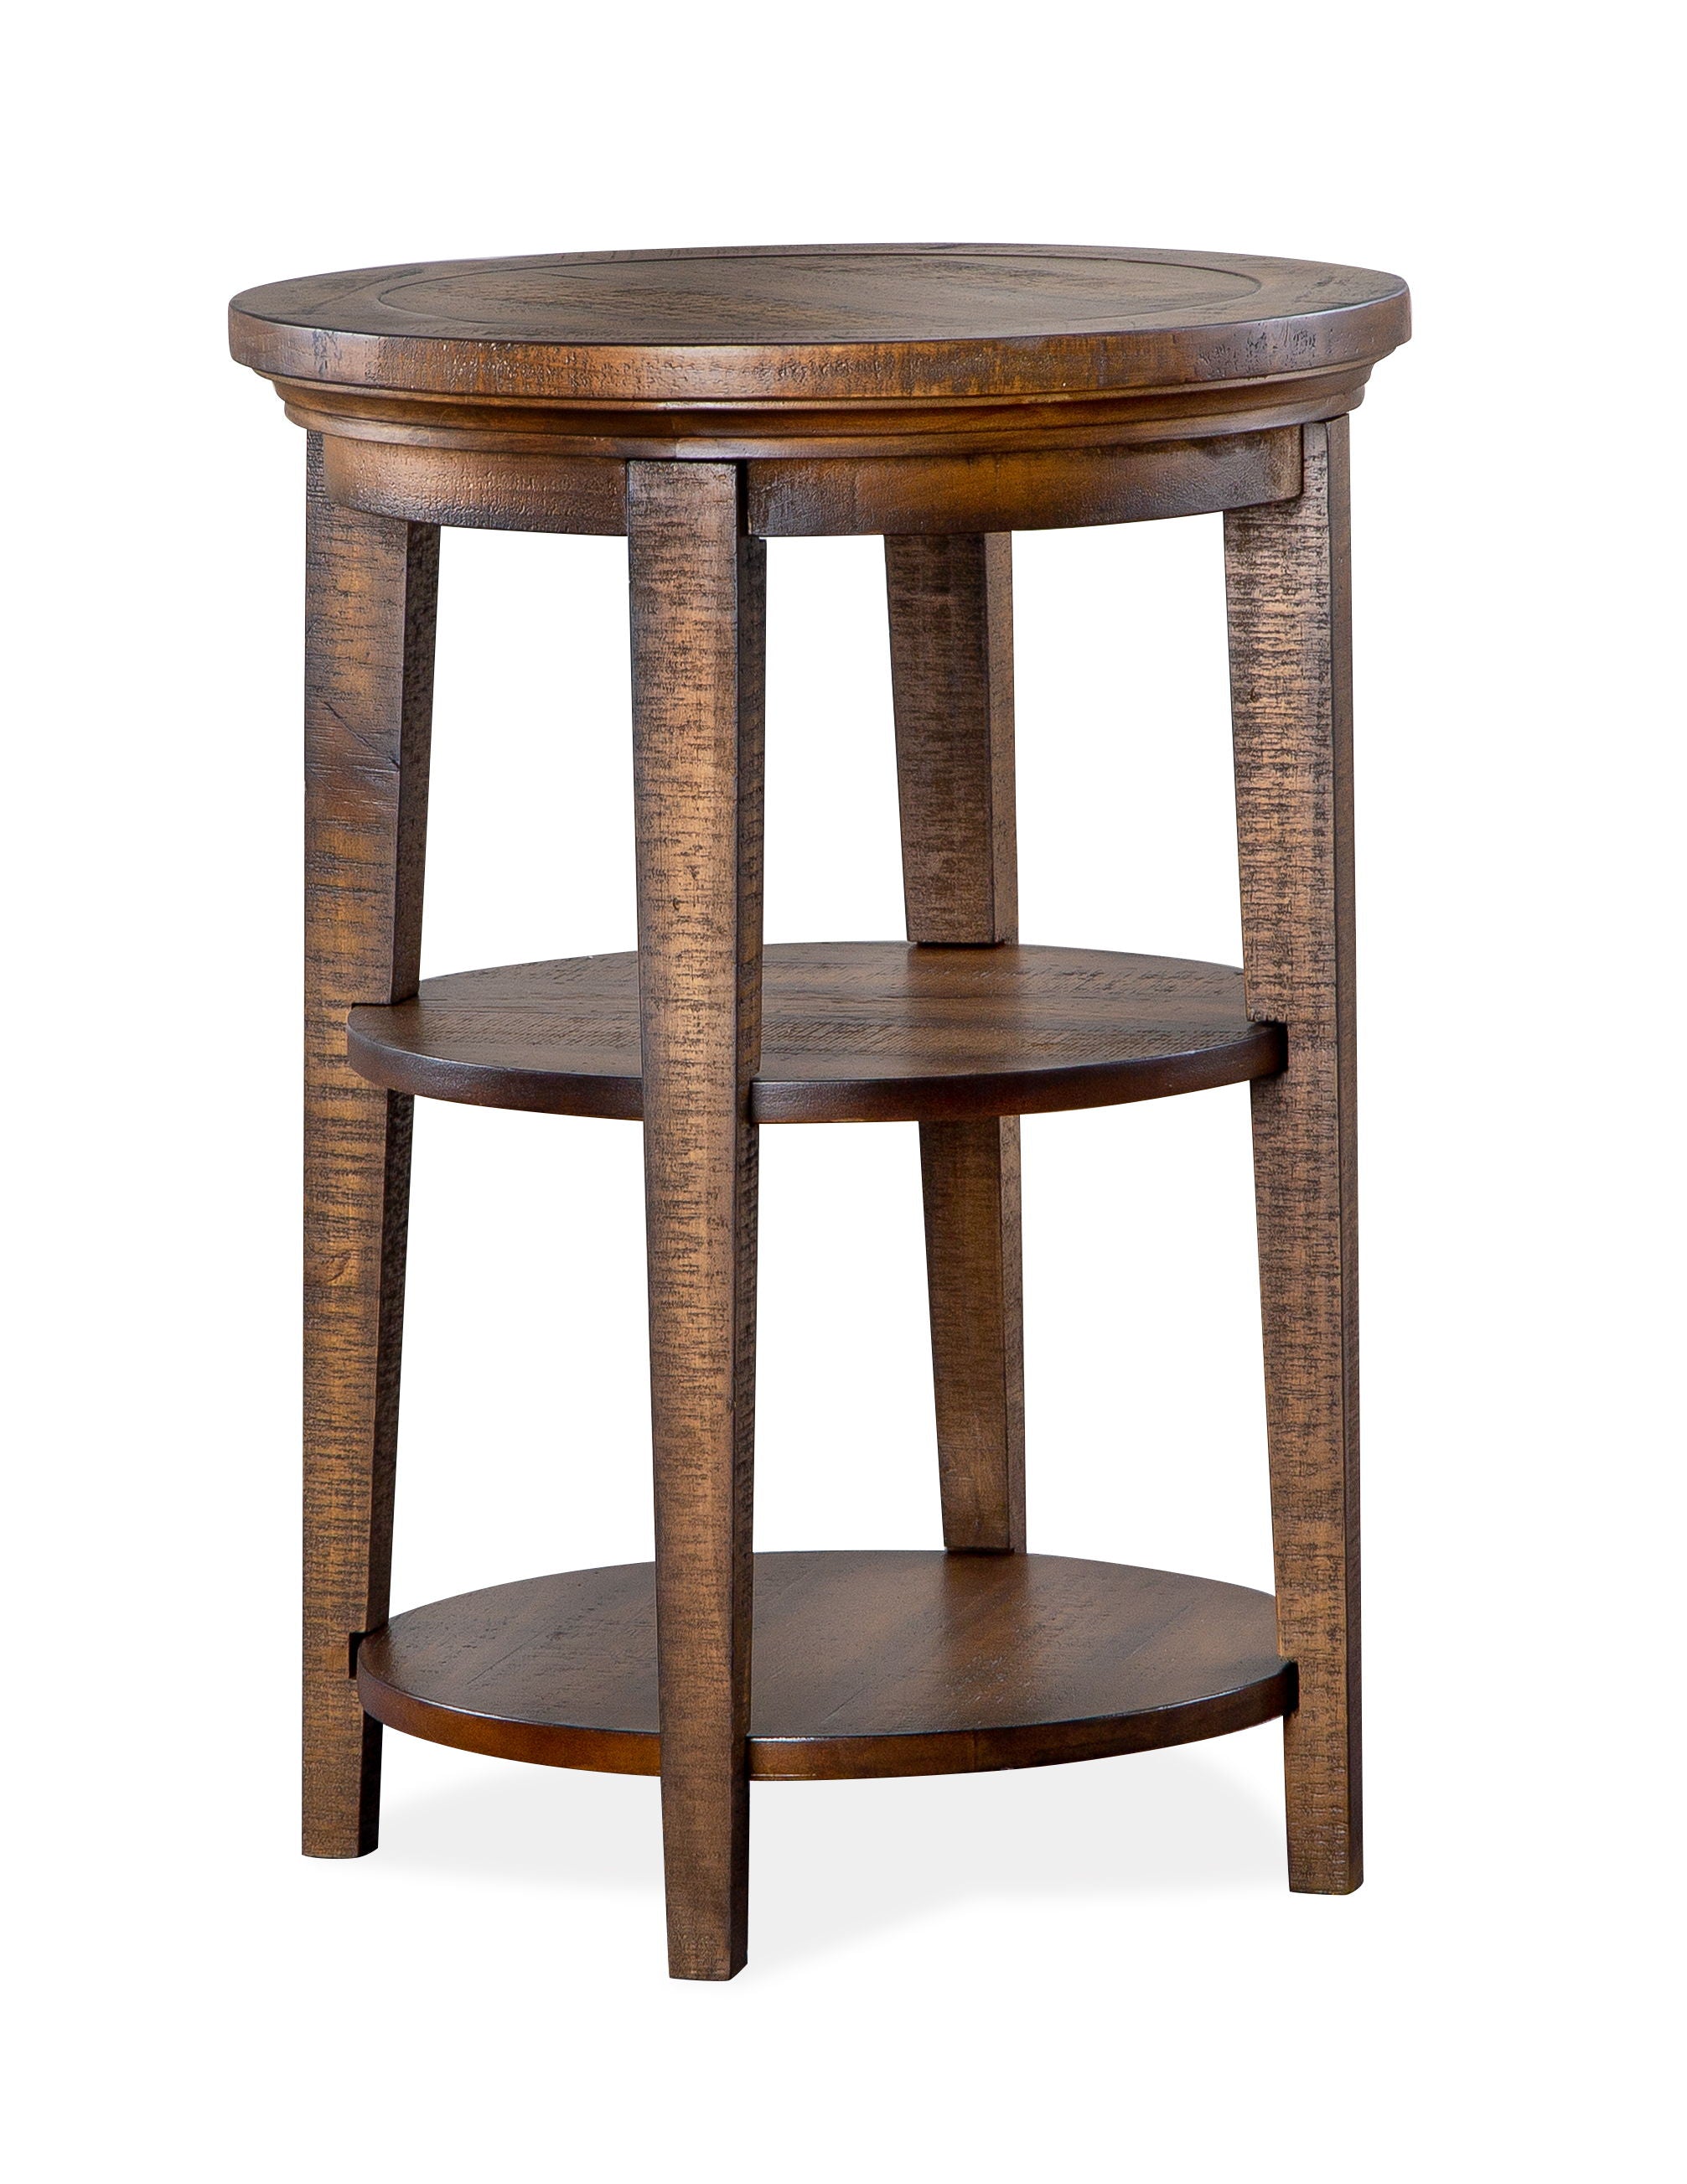 Bay Creek - Round Accent End Table - Toasted Nutmeg